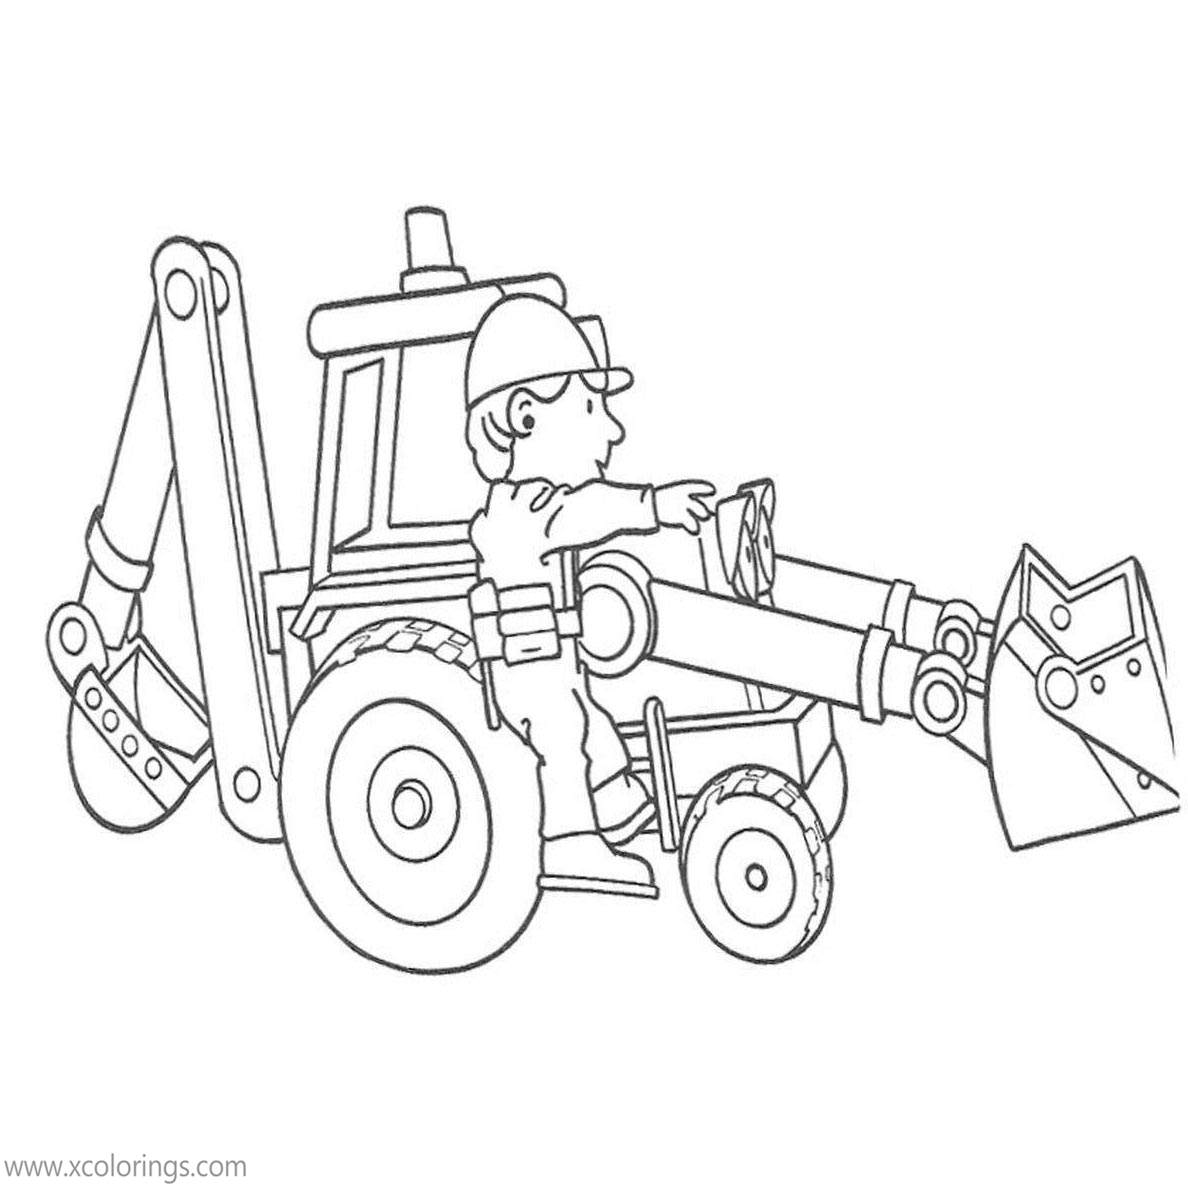 Free Bob The Builder Coloring Pages Characters Bob and Scoop printable